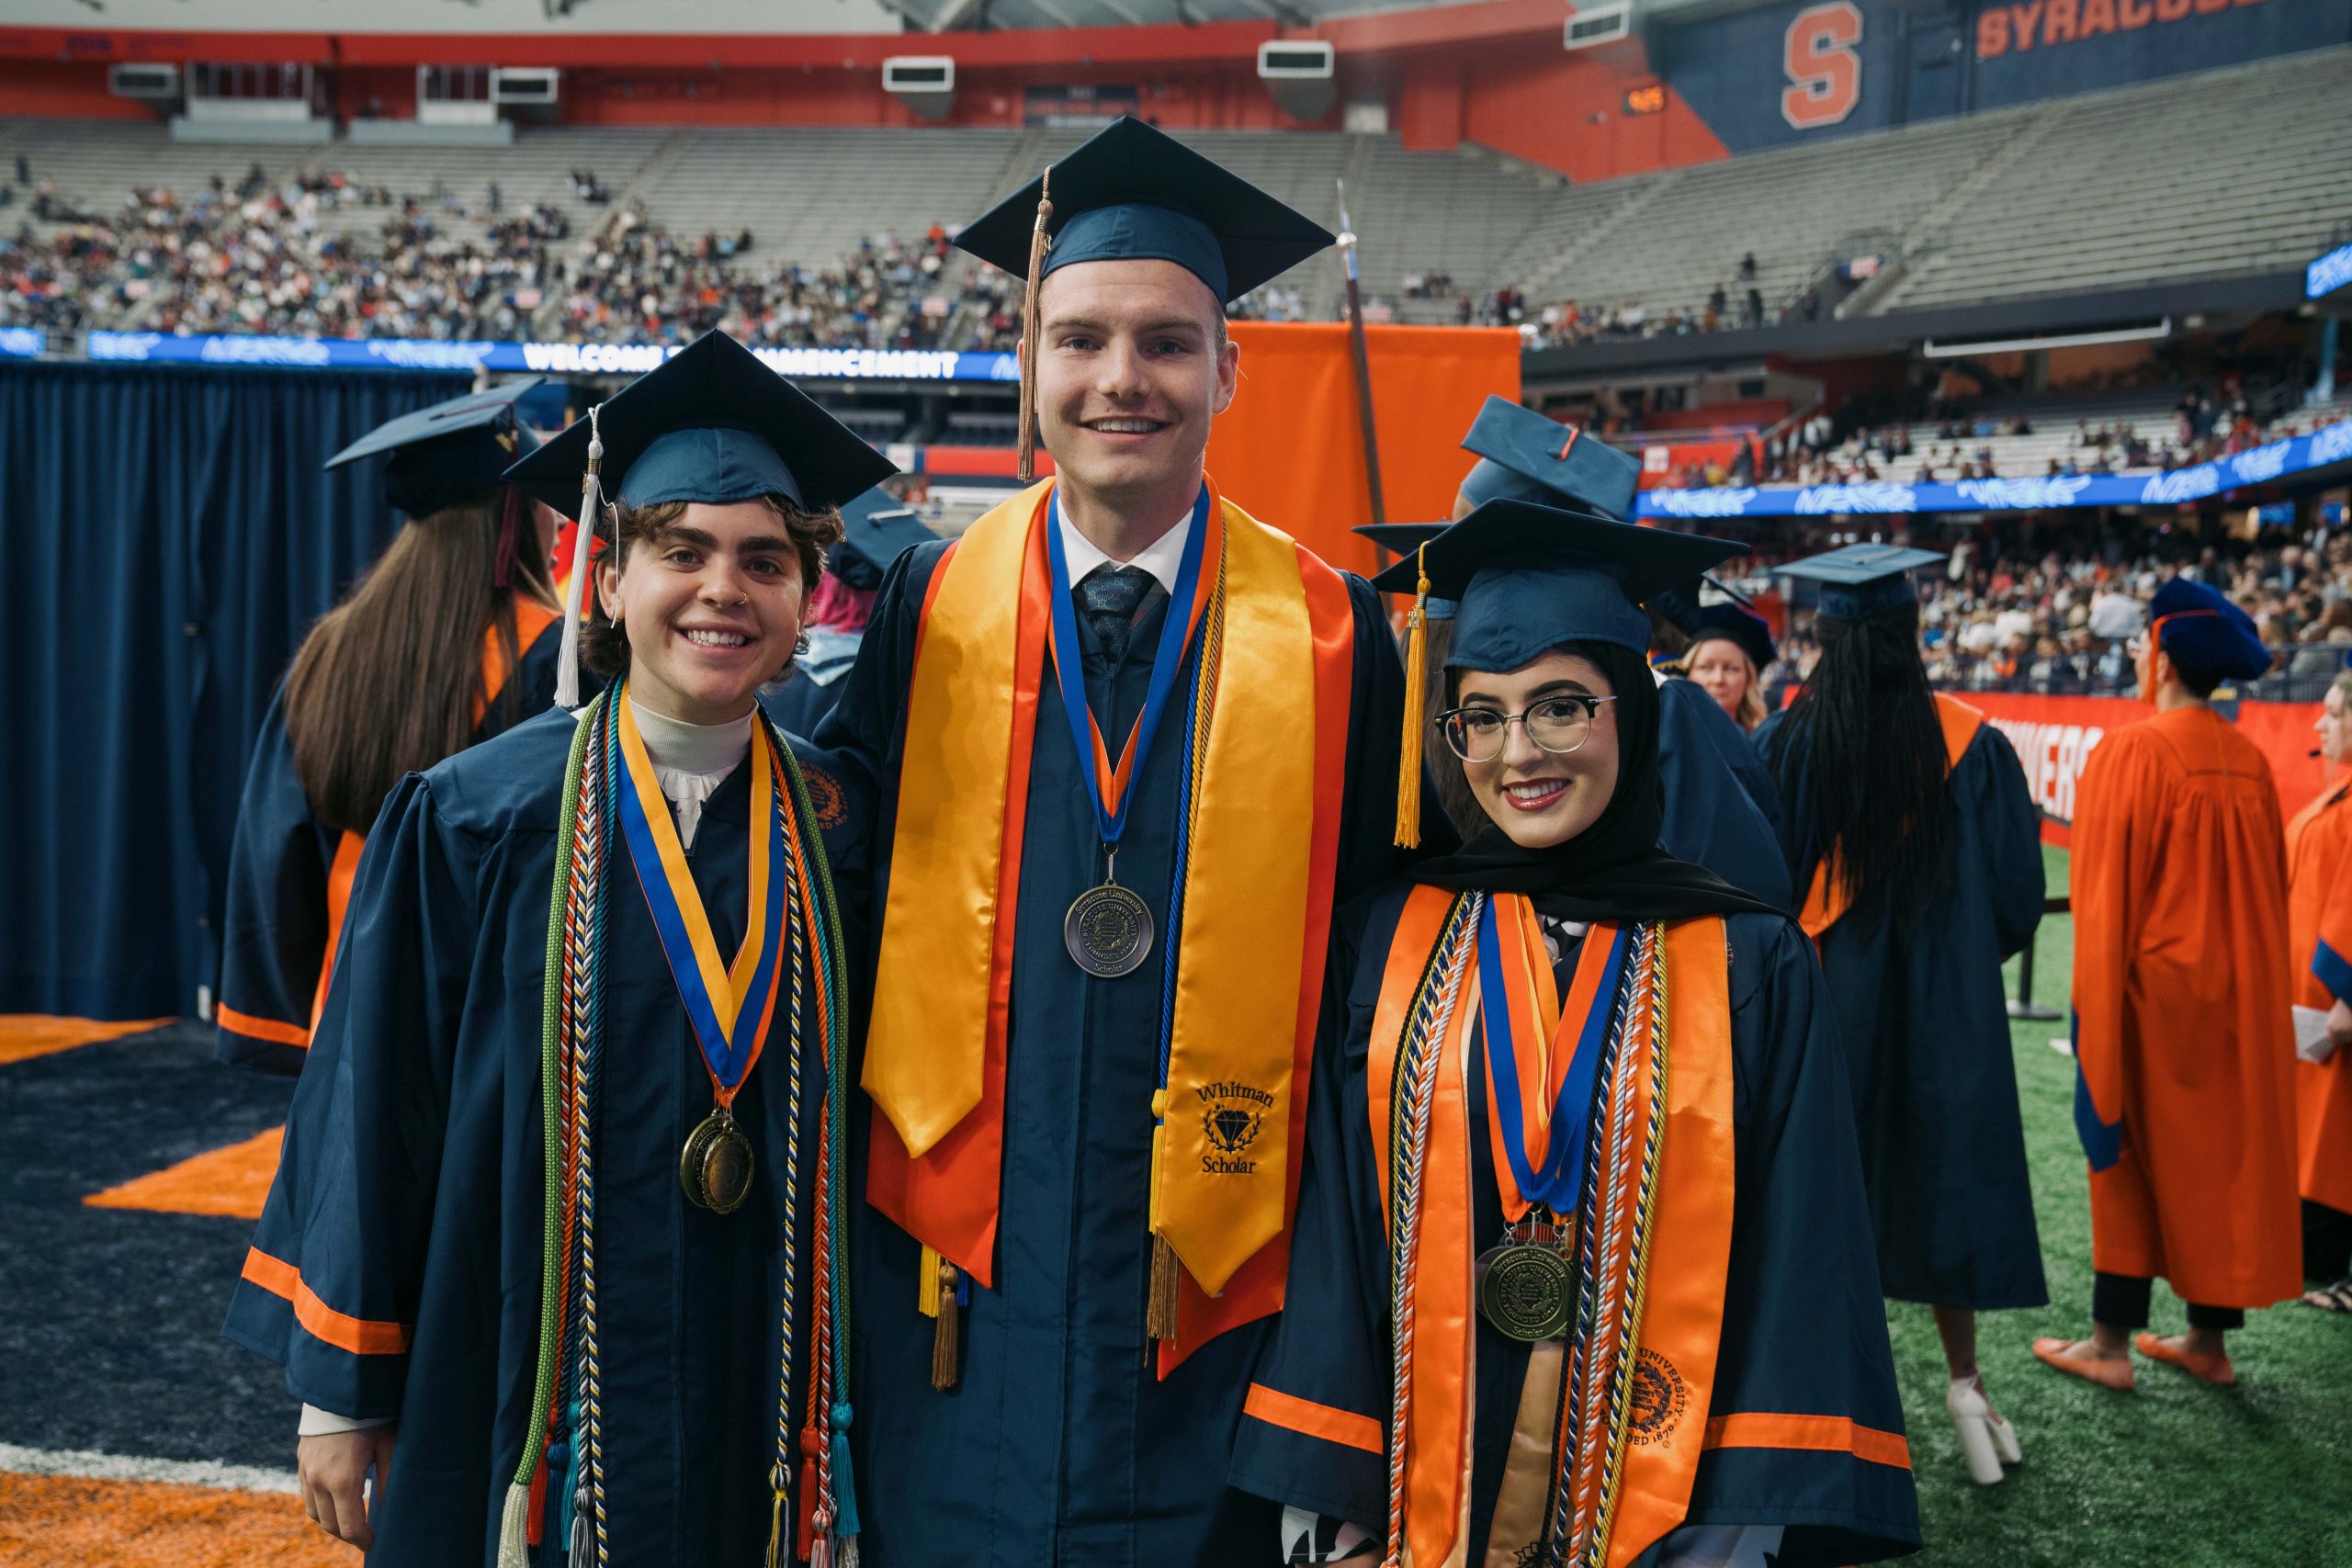 Three students standing together for a photo wearing caps and gowns.